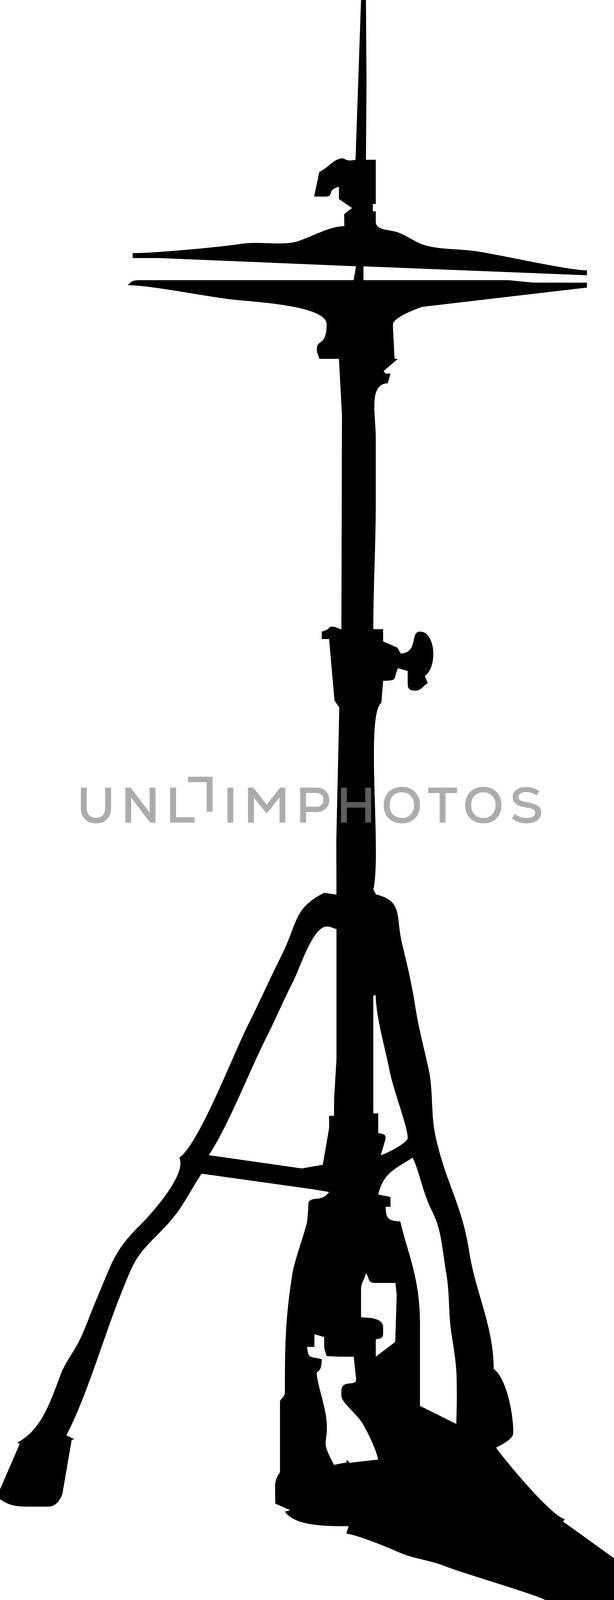 hi-hat cymbals silhouette - isolated vector illustration